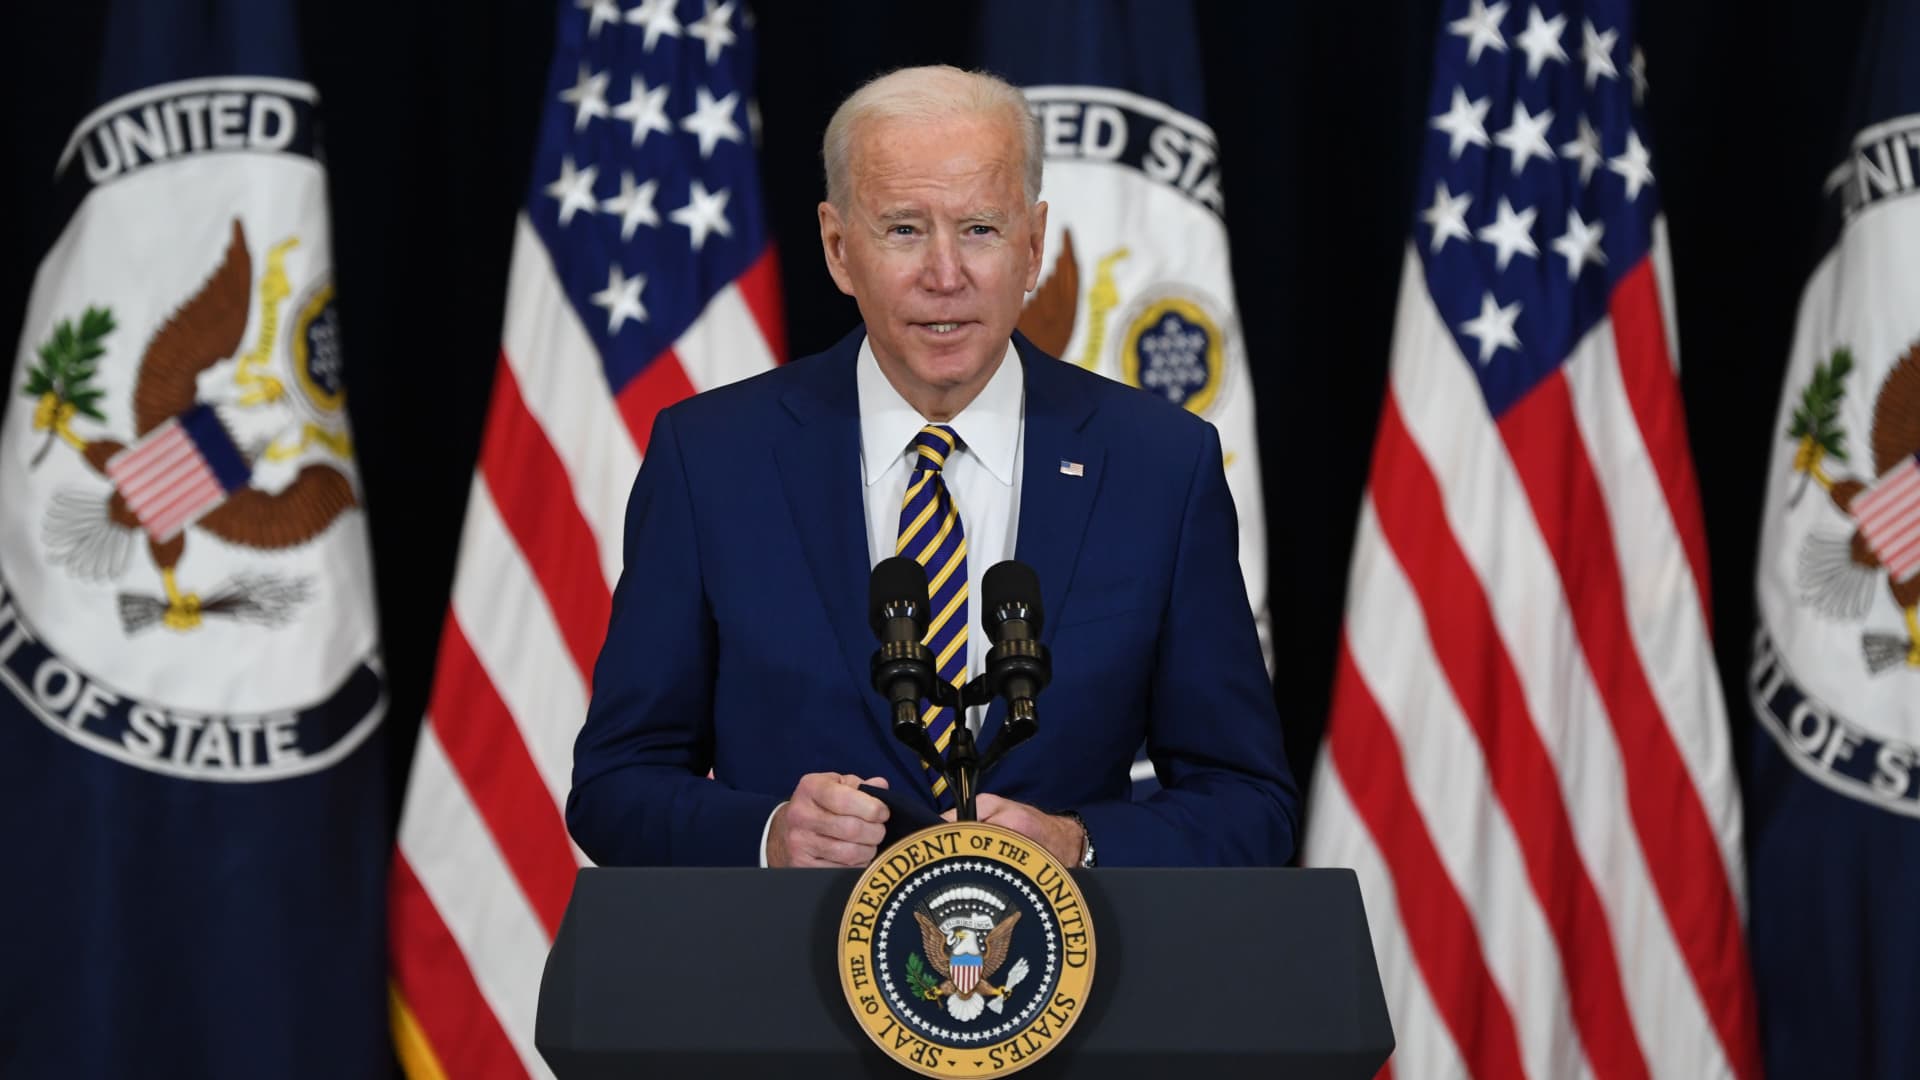 Biden vows to allow more refugees into the United States